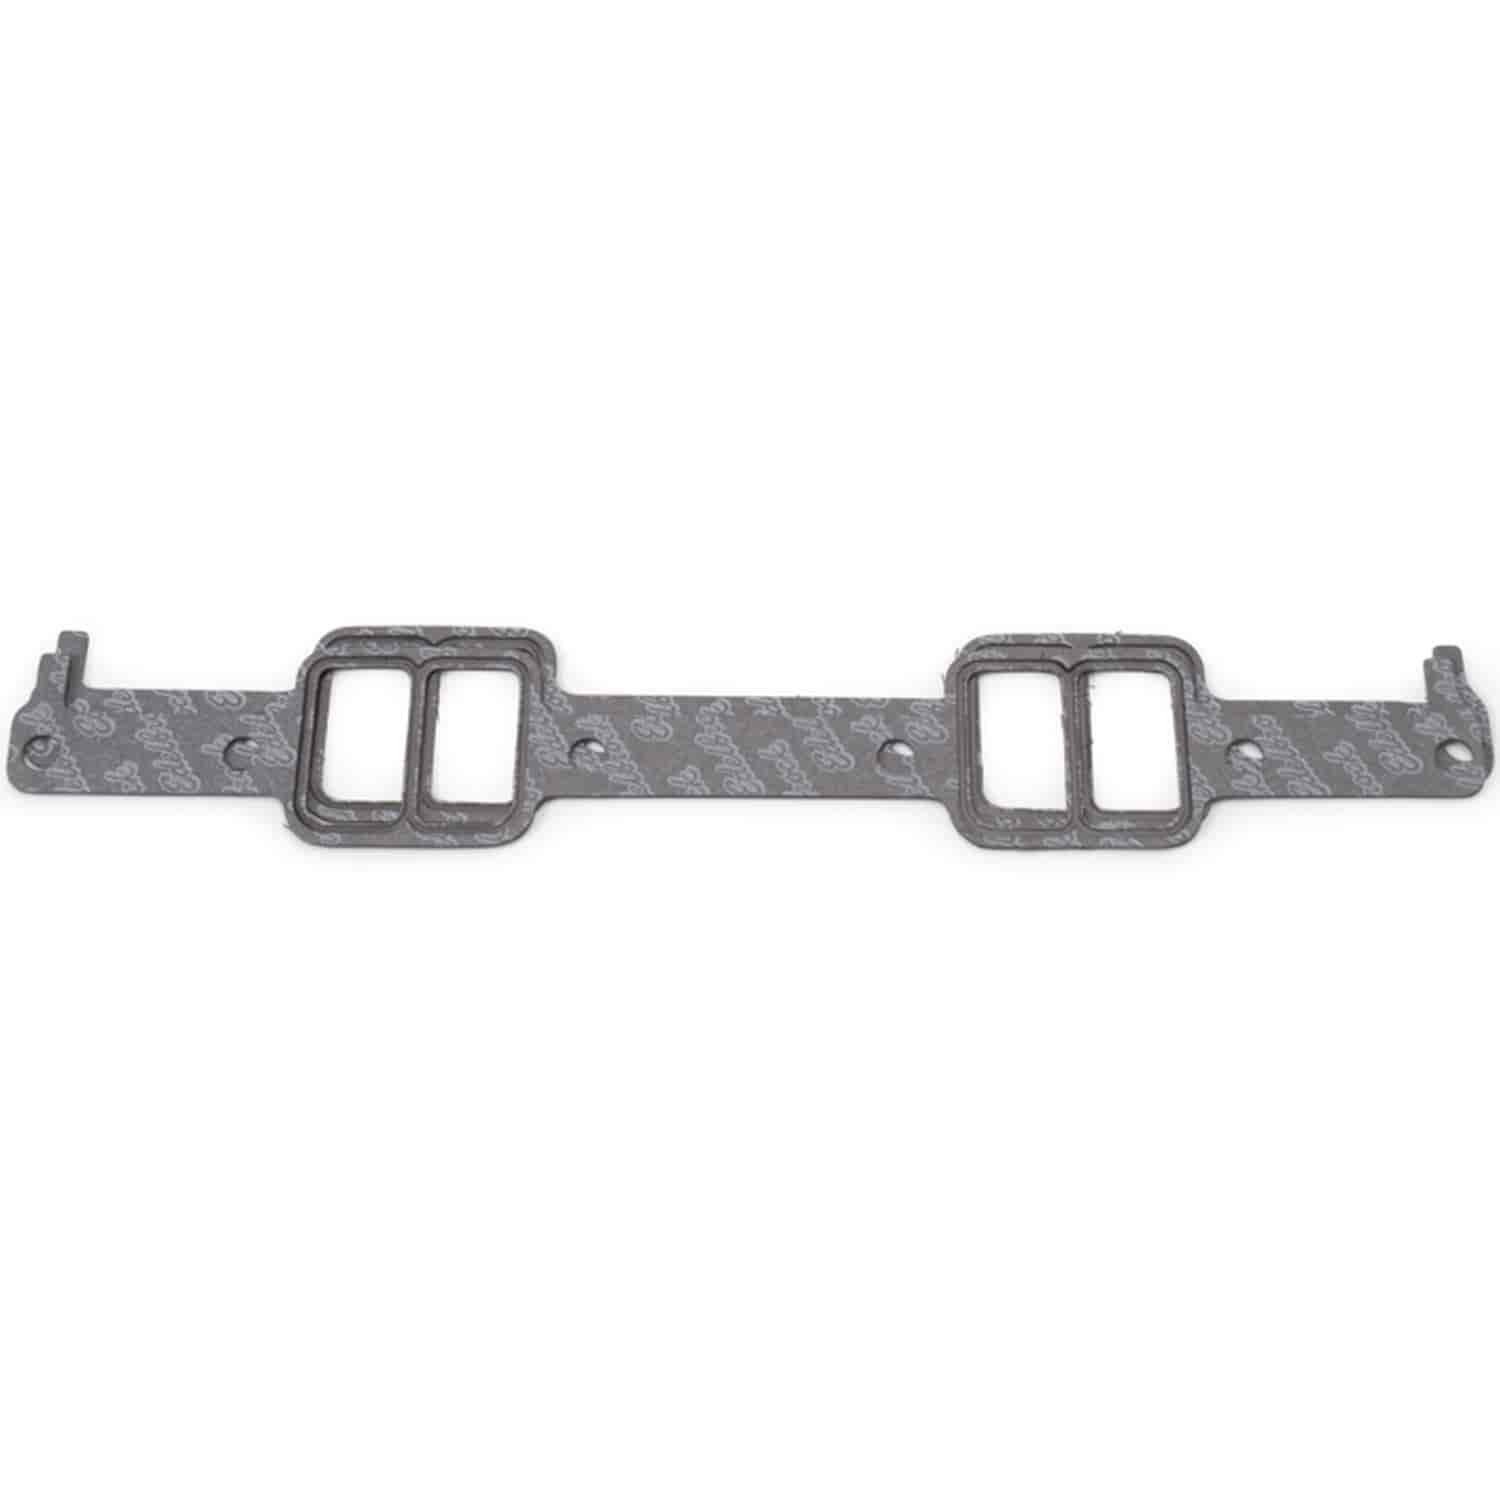 Intake Gaskets for 1992-1997 Chevy LT1